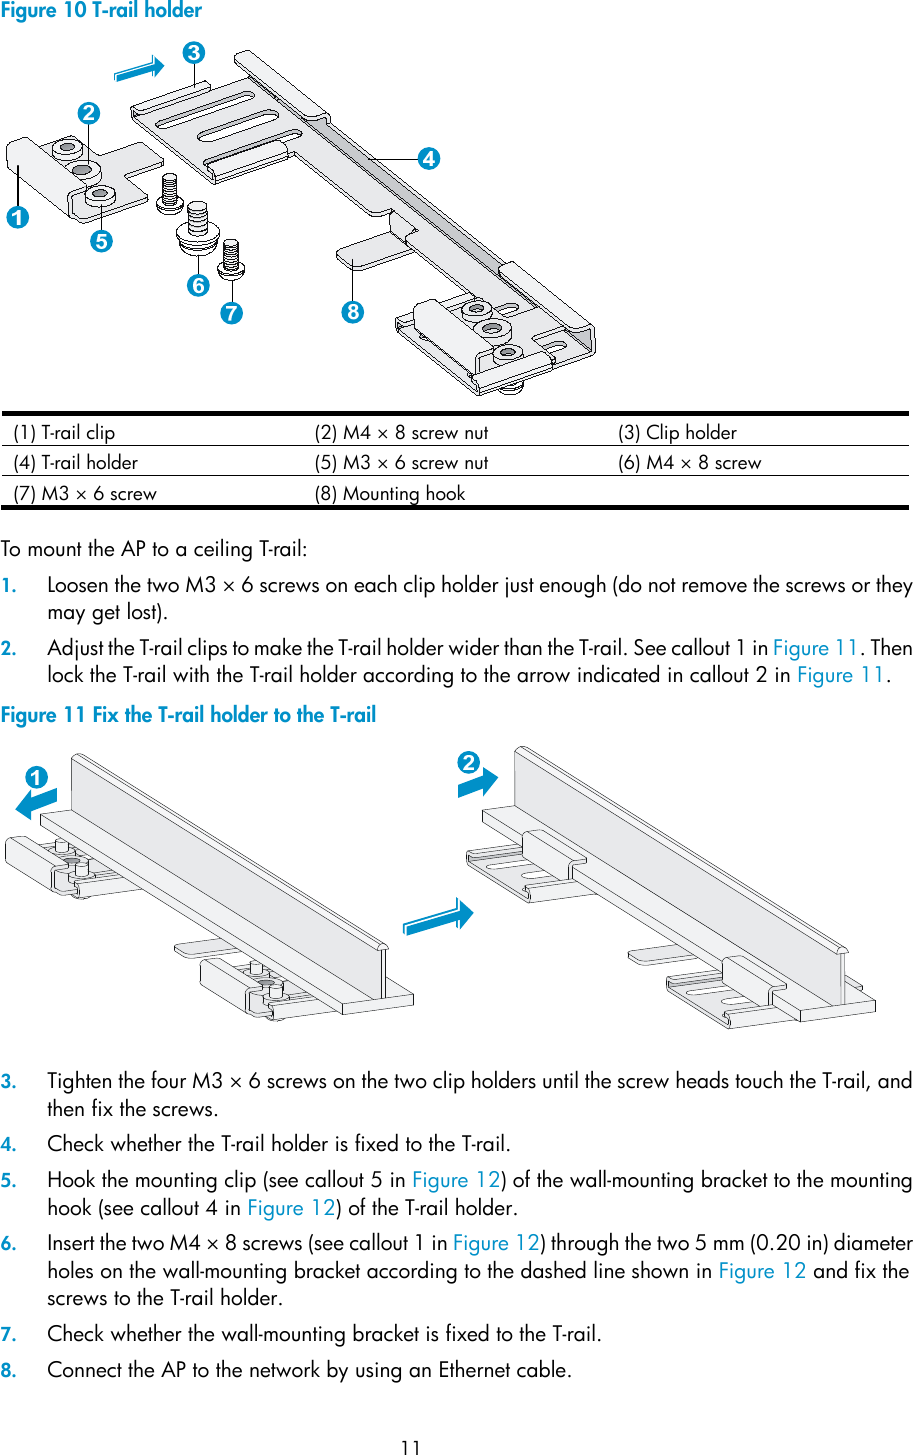  11 Figure 10 T-rail holder  (1) T-rail clip  (2) M4 × 8 screw nut (3) Clip holder (4) T-rail holder  (5) M3 × 6 screw nut (6) M4 × 8 screw (7) M3 × 6 screw  (8) Mounting hook    To mount the AP to a ceiling T-rail: 1. Loosen the two M3 × 6 screws on each clip holder just enough (do not remove the screws or they may get lost). 2. Adjust the T-rail clips to make the T-rail holder wider than the T-rail. See callout 1 in Figure 11. Then lock the T-rail with the T-rail holder according to the arrow indicated in callout 2 in Figure 11. Figure 11 Fix the T-rail holder to the T-rail   3. Tighten the four M3 × 6 screws on the two clip holders until the screw heads touch the T-rail, and then fix the screws. 4. Check whether the T-rail holder is fixed to the T-rail. 5. Hook the mounting clip (see callout 5 in Figure 12) of the wall-mounting bracket to the mounting hook (see callout 4 in Figure 12) of the T-rail holder. 6. Insert the two M4 × 8 screws (see callout 1 in Figure 12) through the two 5 mm (0.20 in) diameter holes on the wall-mounting bracket according to the dashed line shown in Figure 12 and fix the screws to the T-rail holder.  7. Check whether the wall-mounting bracket is fixed to the T-rail. 8. Connect the AP to the network by using an Ethernet cable. 